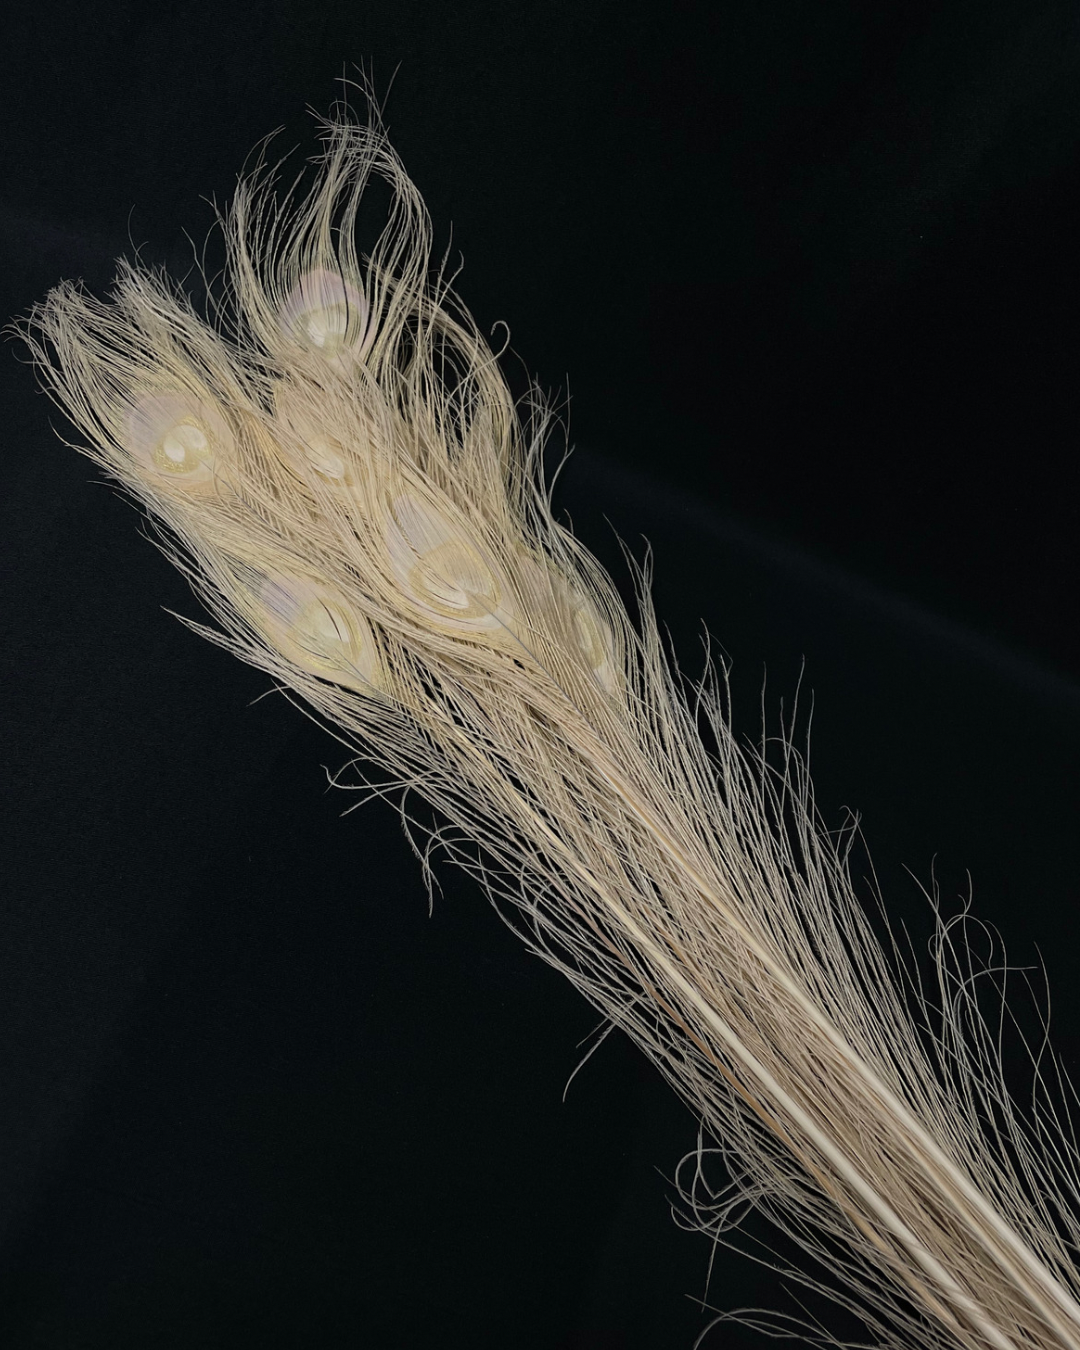 Dried Peacock Feathers